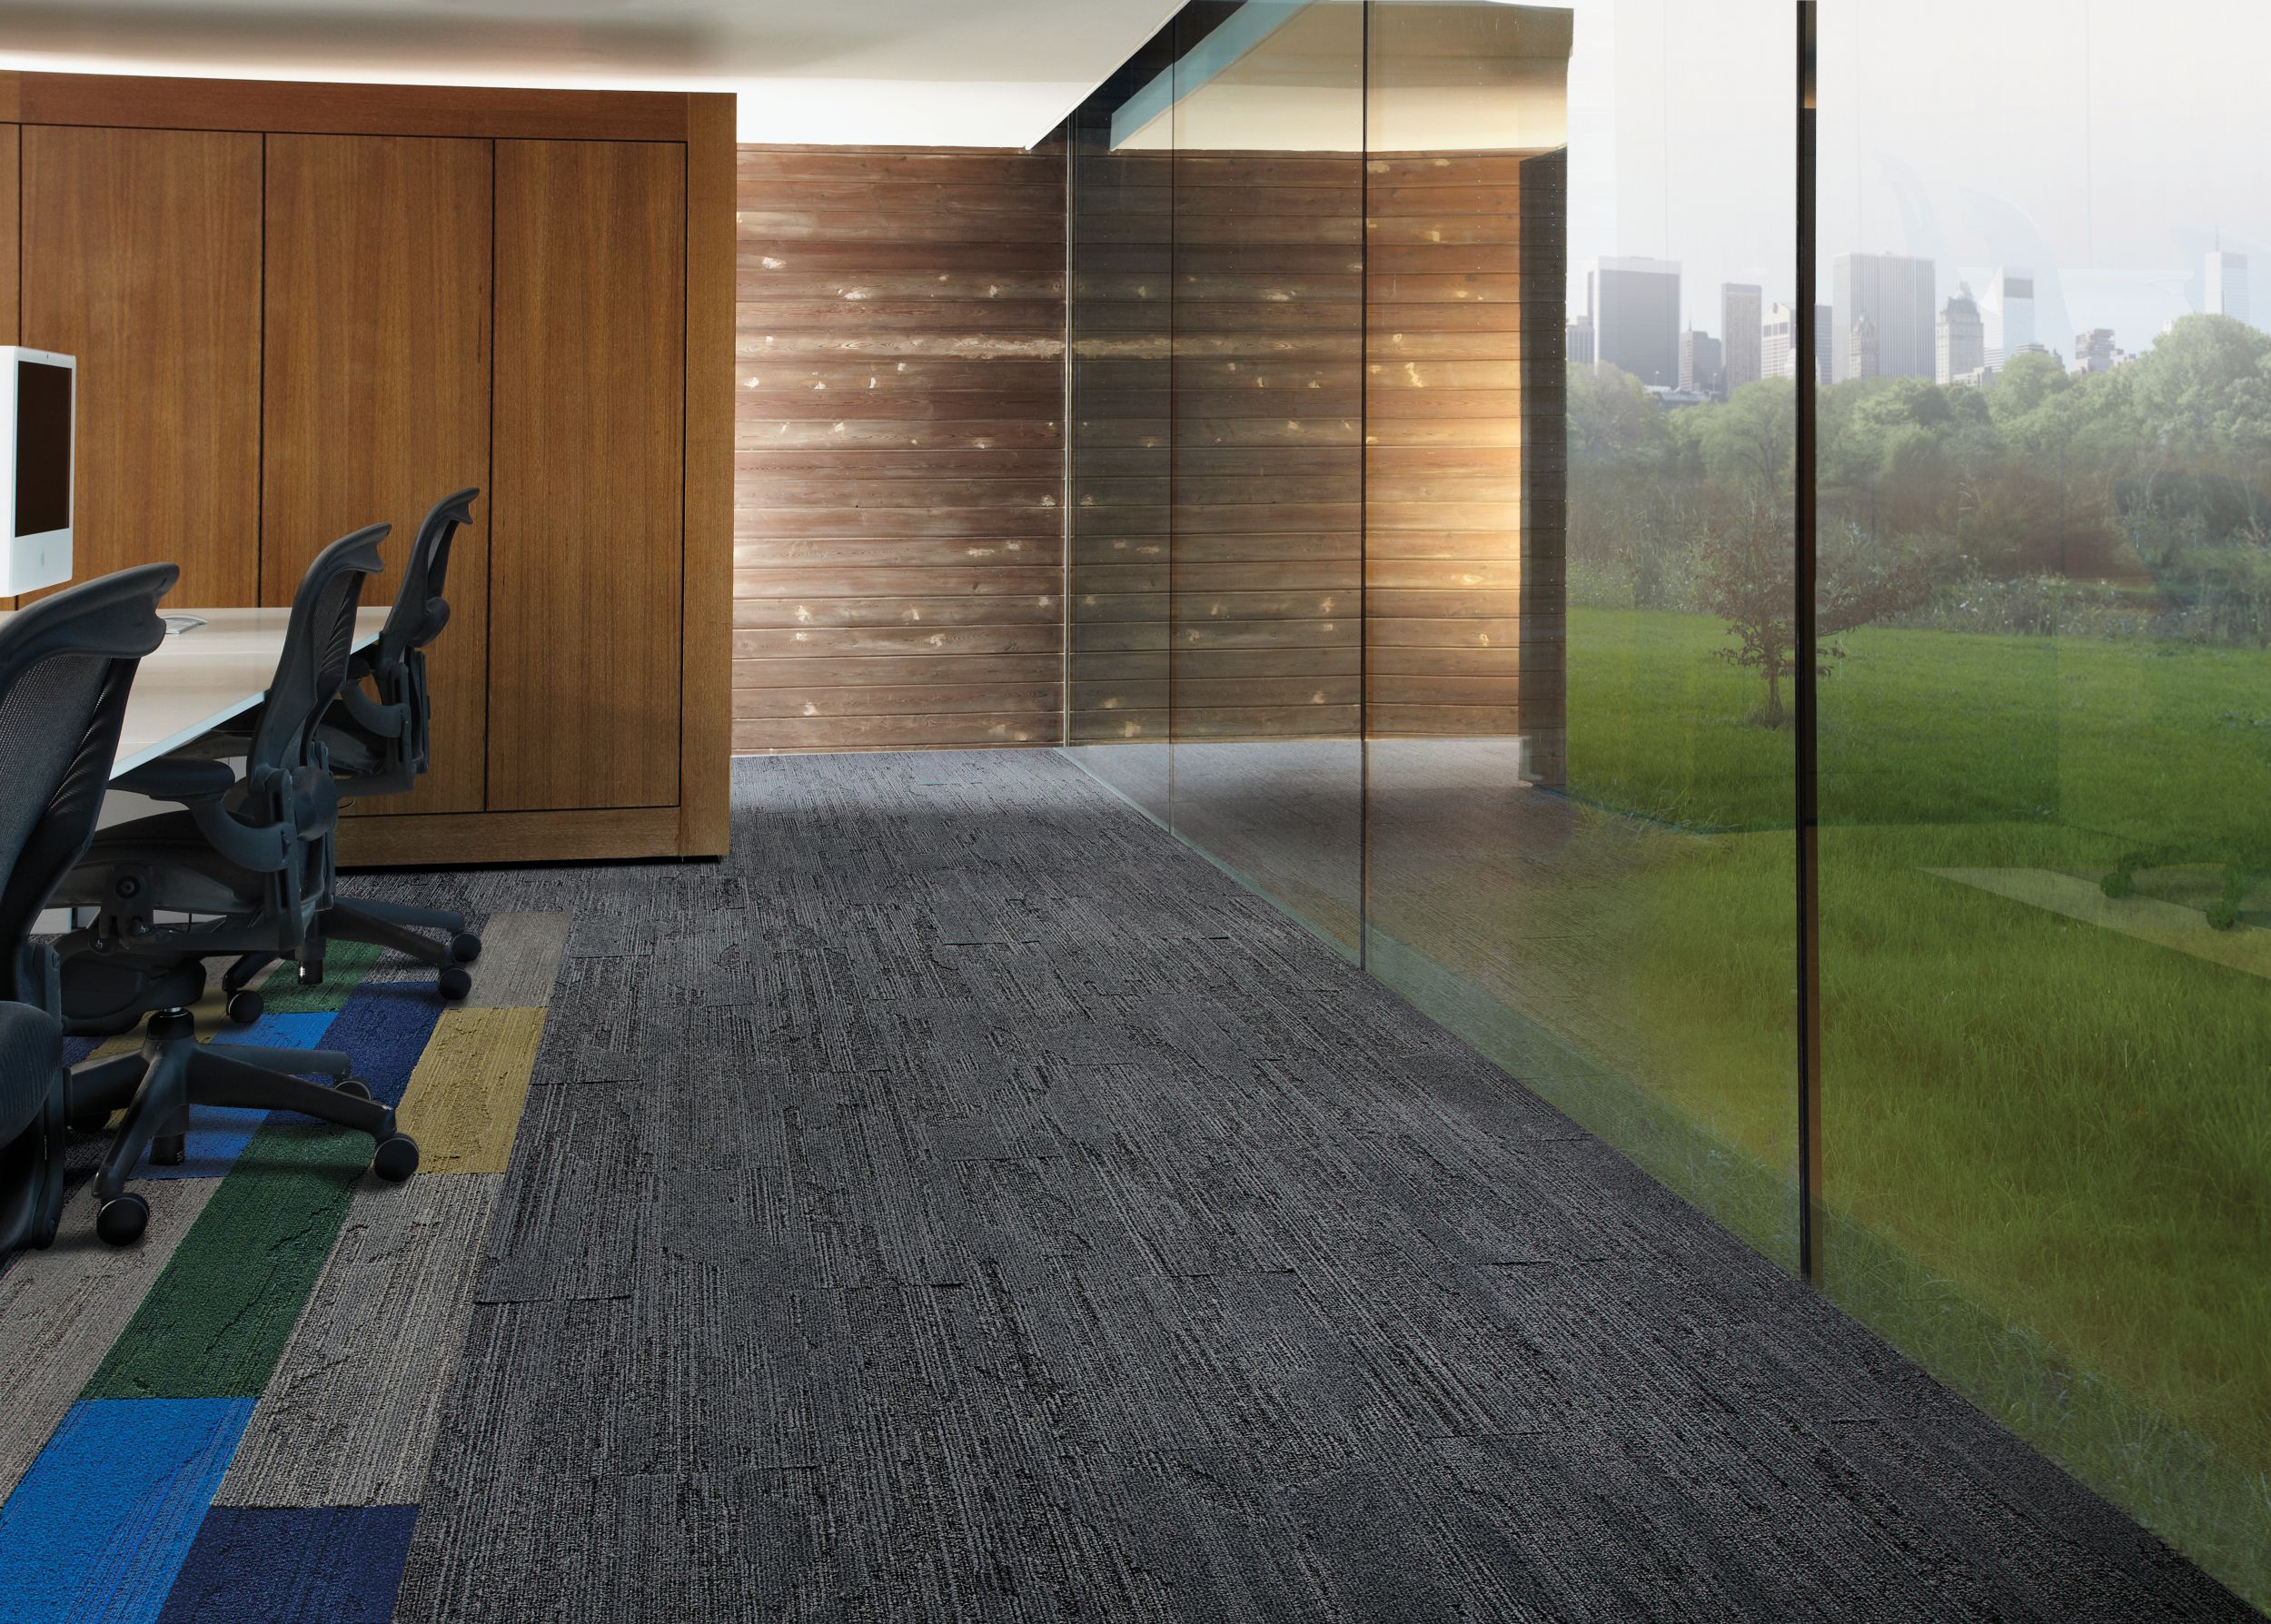 Interface UR501 plank carpet tile in multiple colors in meeting room with large windows image number 9